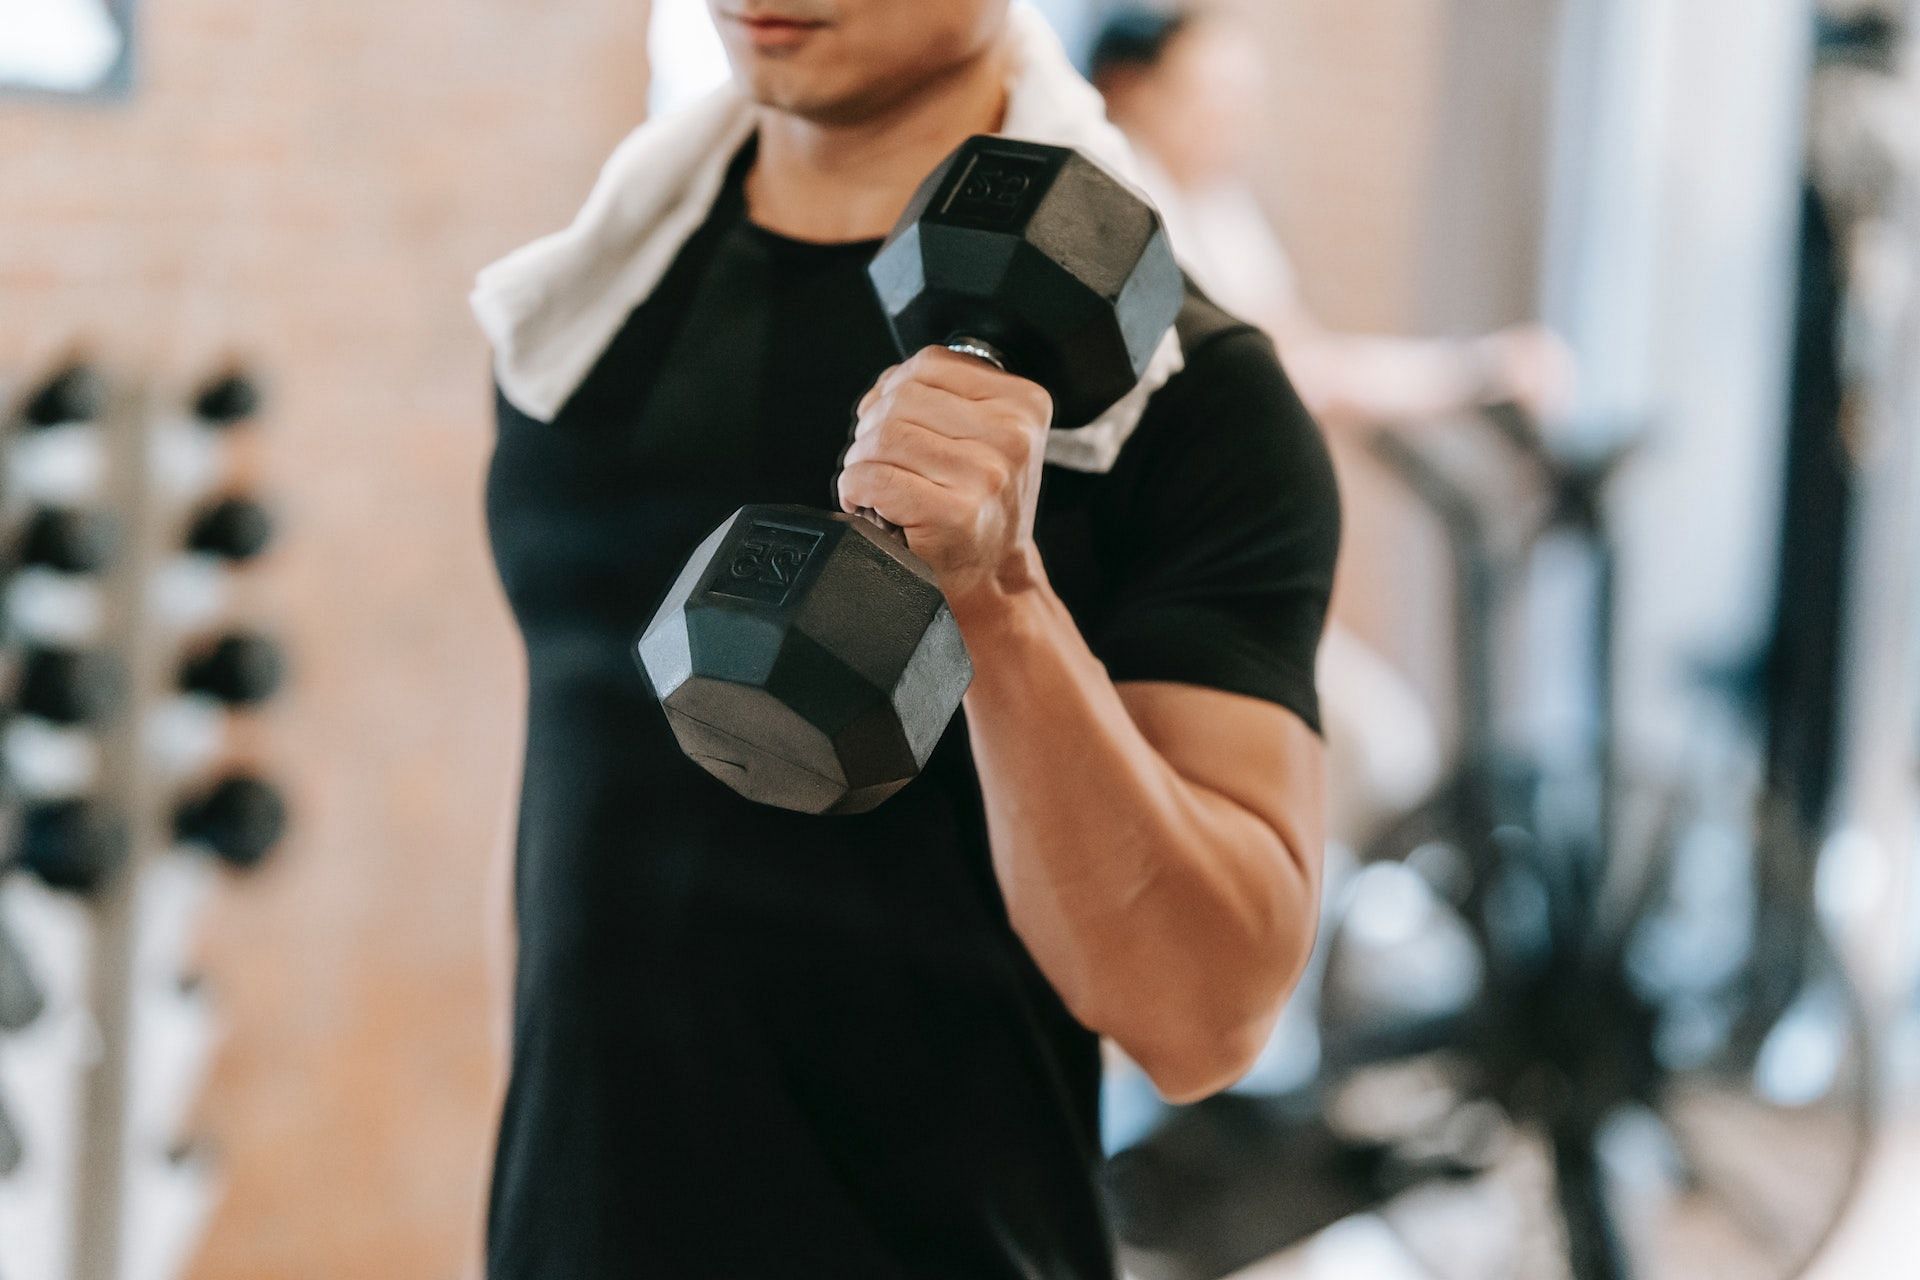 Toned arms workouts for men strengthen the entire arm muscles. (Photo via Pexels/Andres Ayrton)